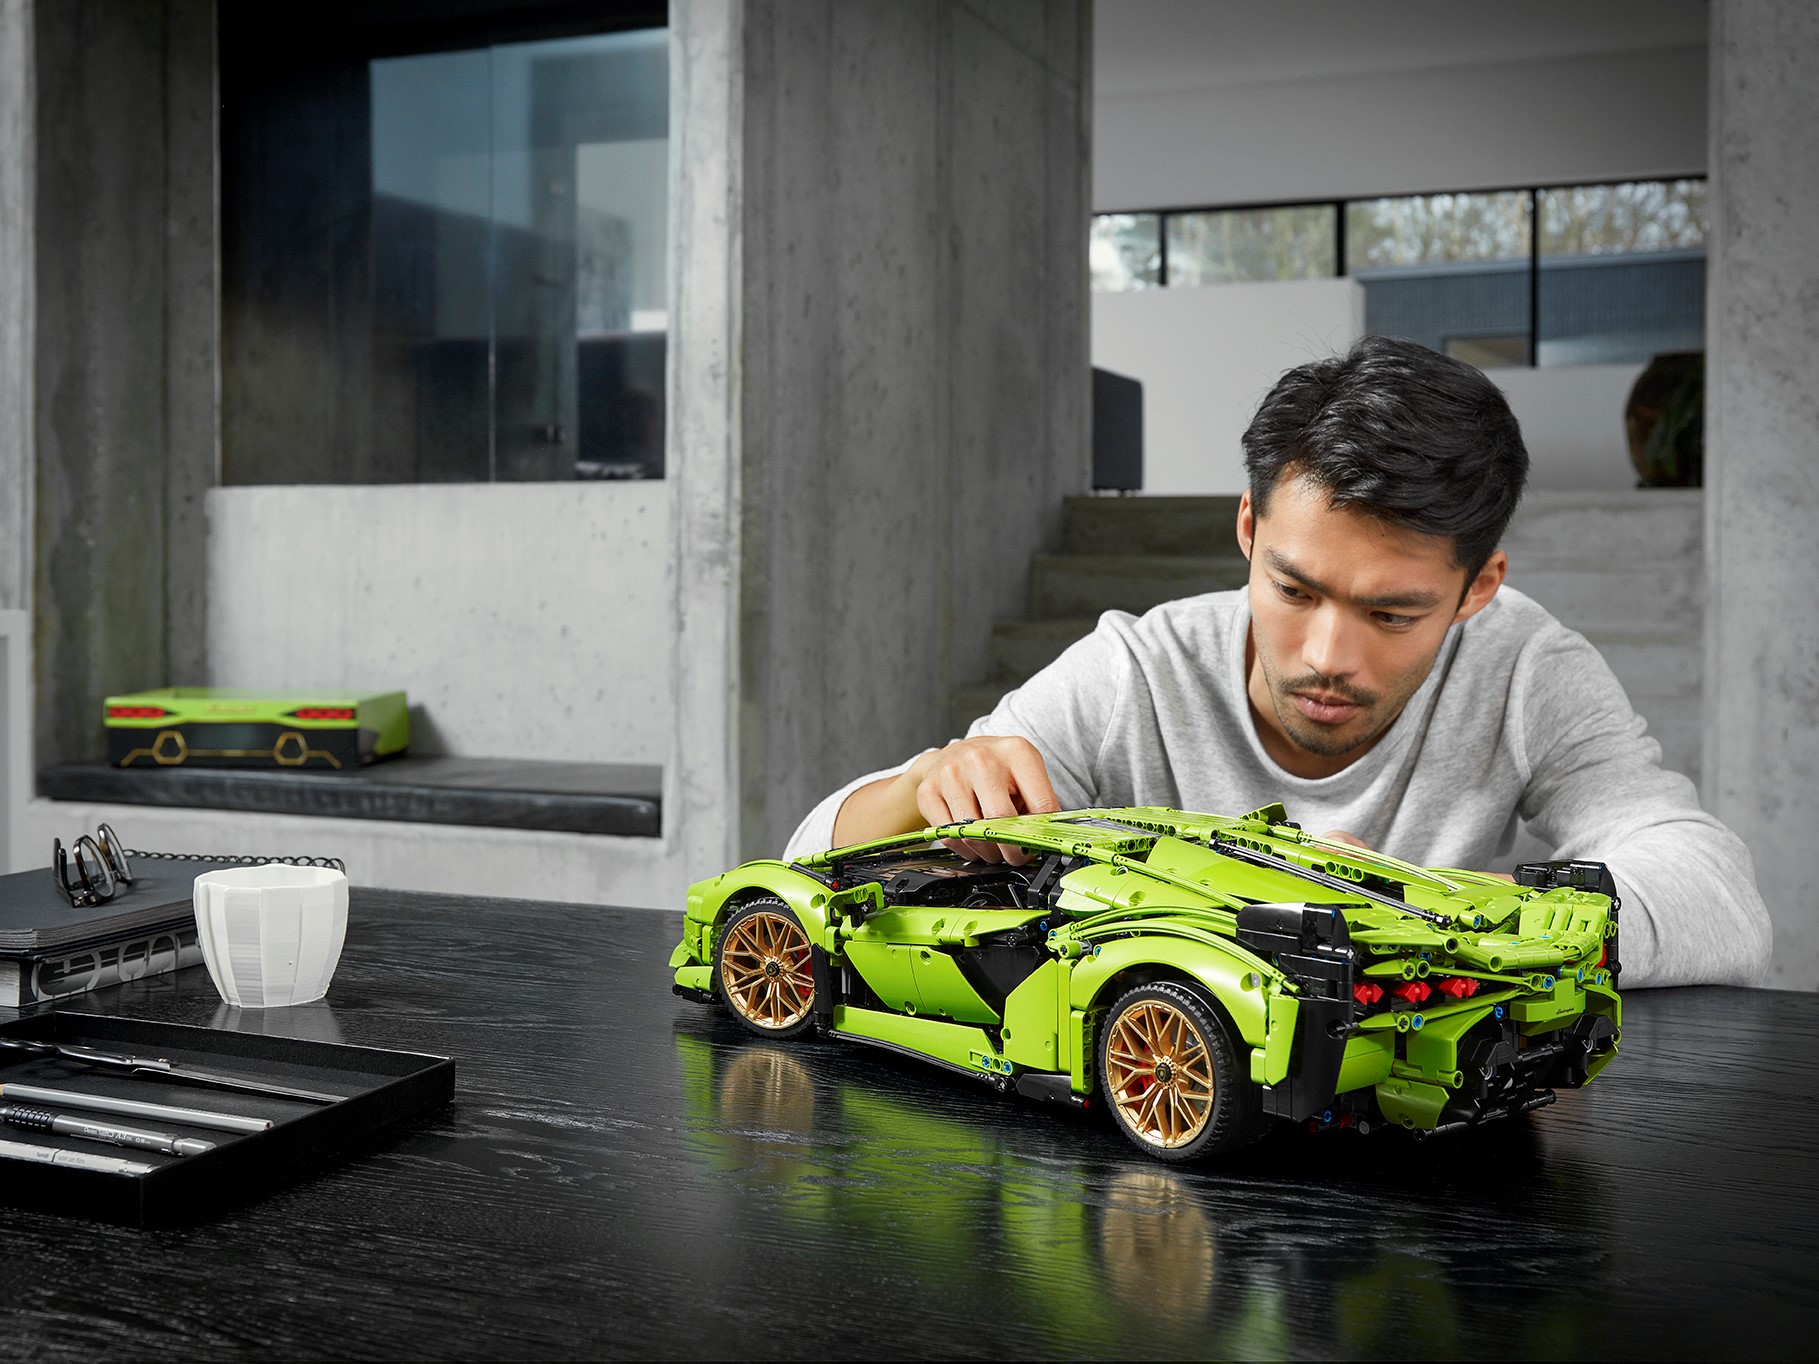 Lamborghini Sián 37 42115 | Technic™ | Buy online at the Official LEGO® US